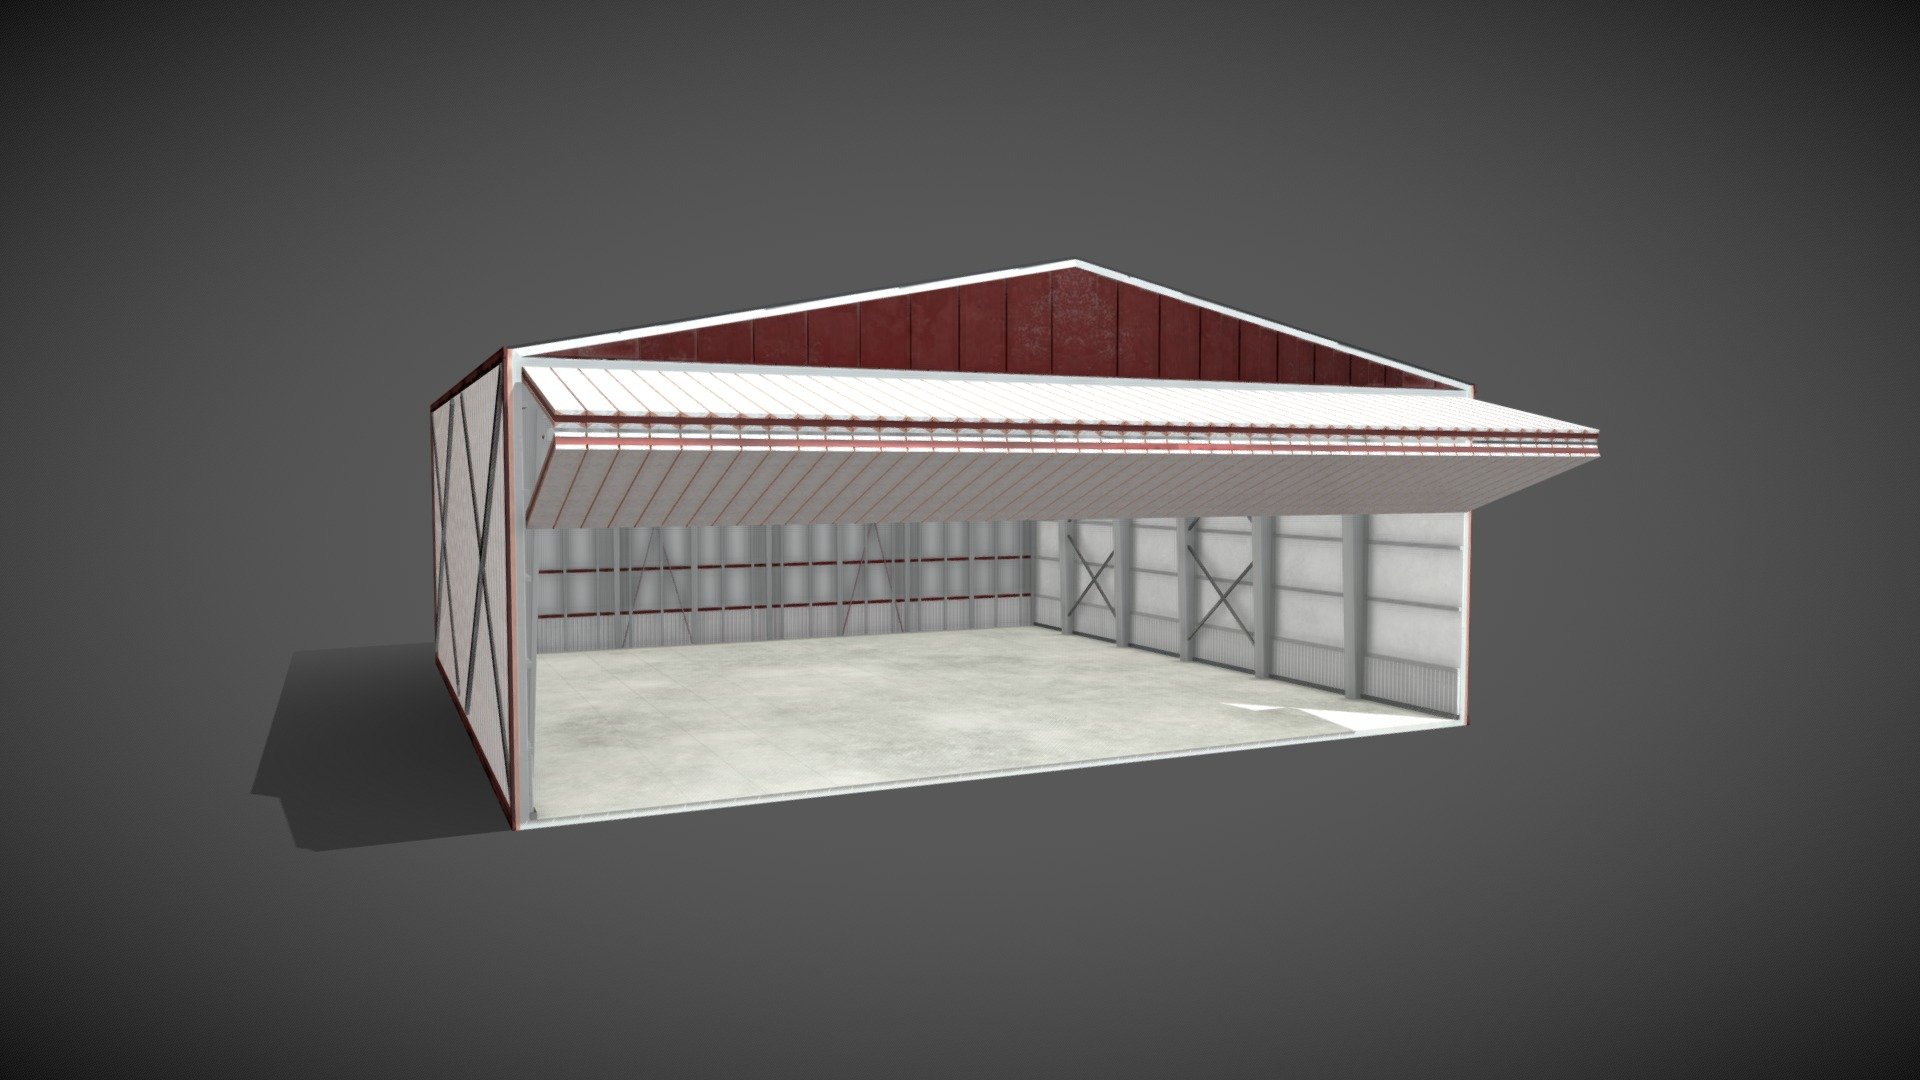 Airplane Hangar 3D Model is completely ready to be used in your games, animations, films, designs etc.  

Model includes interior and exterior.

All textures and materials are included and mapped in every format. The model is completely ready for use visualization in any 3d software and engine.  

Technical details:  


File formats included in the package are: FBX, OBJ, GLB, ABC, DAE, PLY, STL, BLEND, gLTF (generated), USDZ (generated)  
Native software file format: BLEND  
Polygons: 8,986
Vertices: 13,454
Textures: Color, Metallic, Roughness, Normal, AO.  
All textures are 2k resolution.

Important note:

Interior floor is properly textured - the problem is in the presentation part here -&gt; too see what the floor looks like, check here https://sketchfab.com/3d-models/airplane-hangar-interior-3d-model-03ba85532b404ae38082b3cb4f869113 - Airplane Hangar 3D Model - Buy Royalty Free 3D model by 3DDisco 3d model